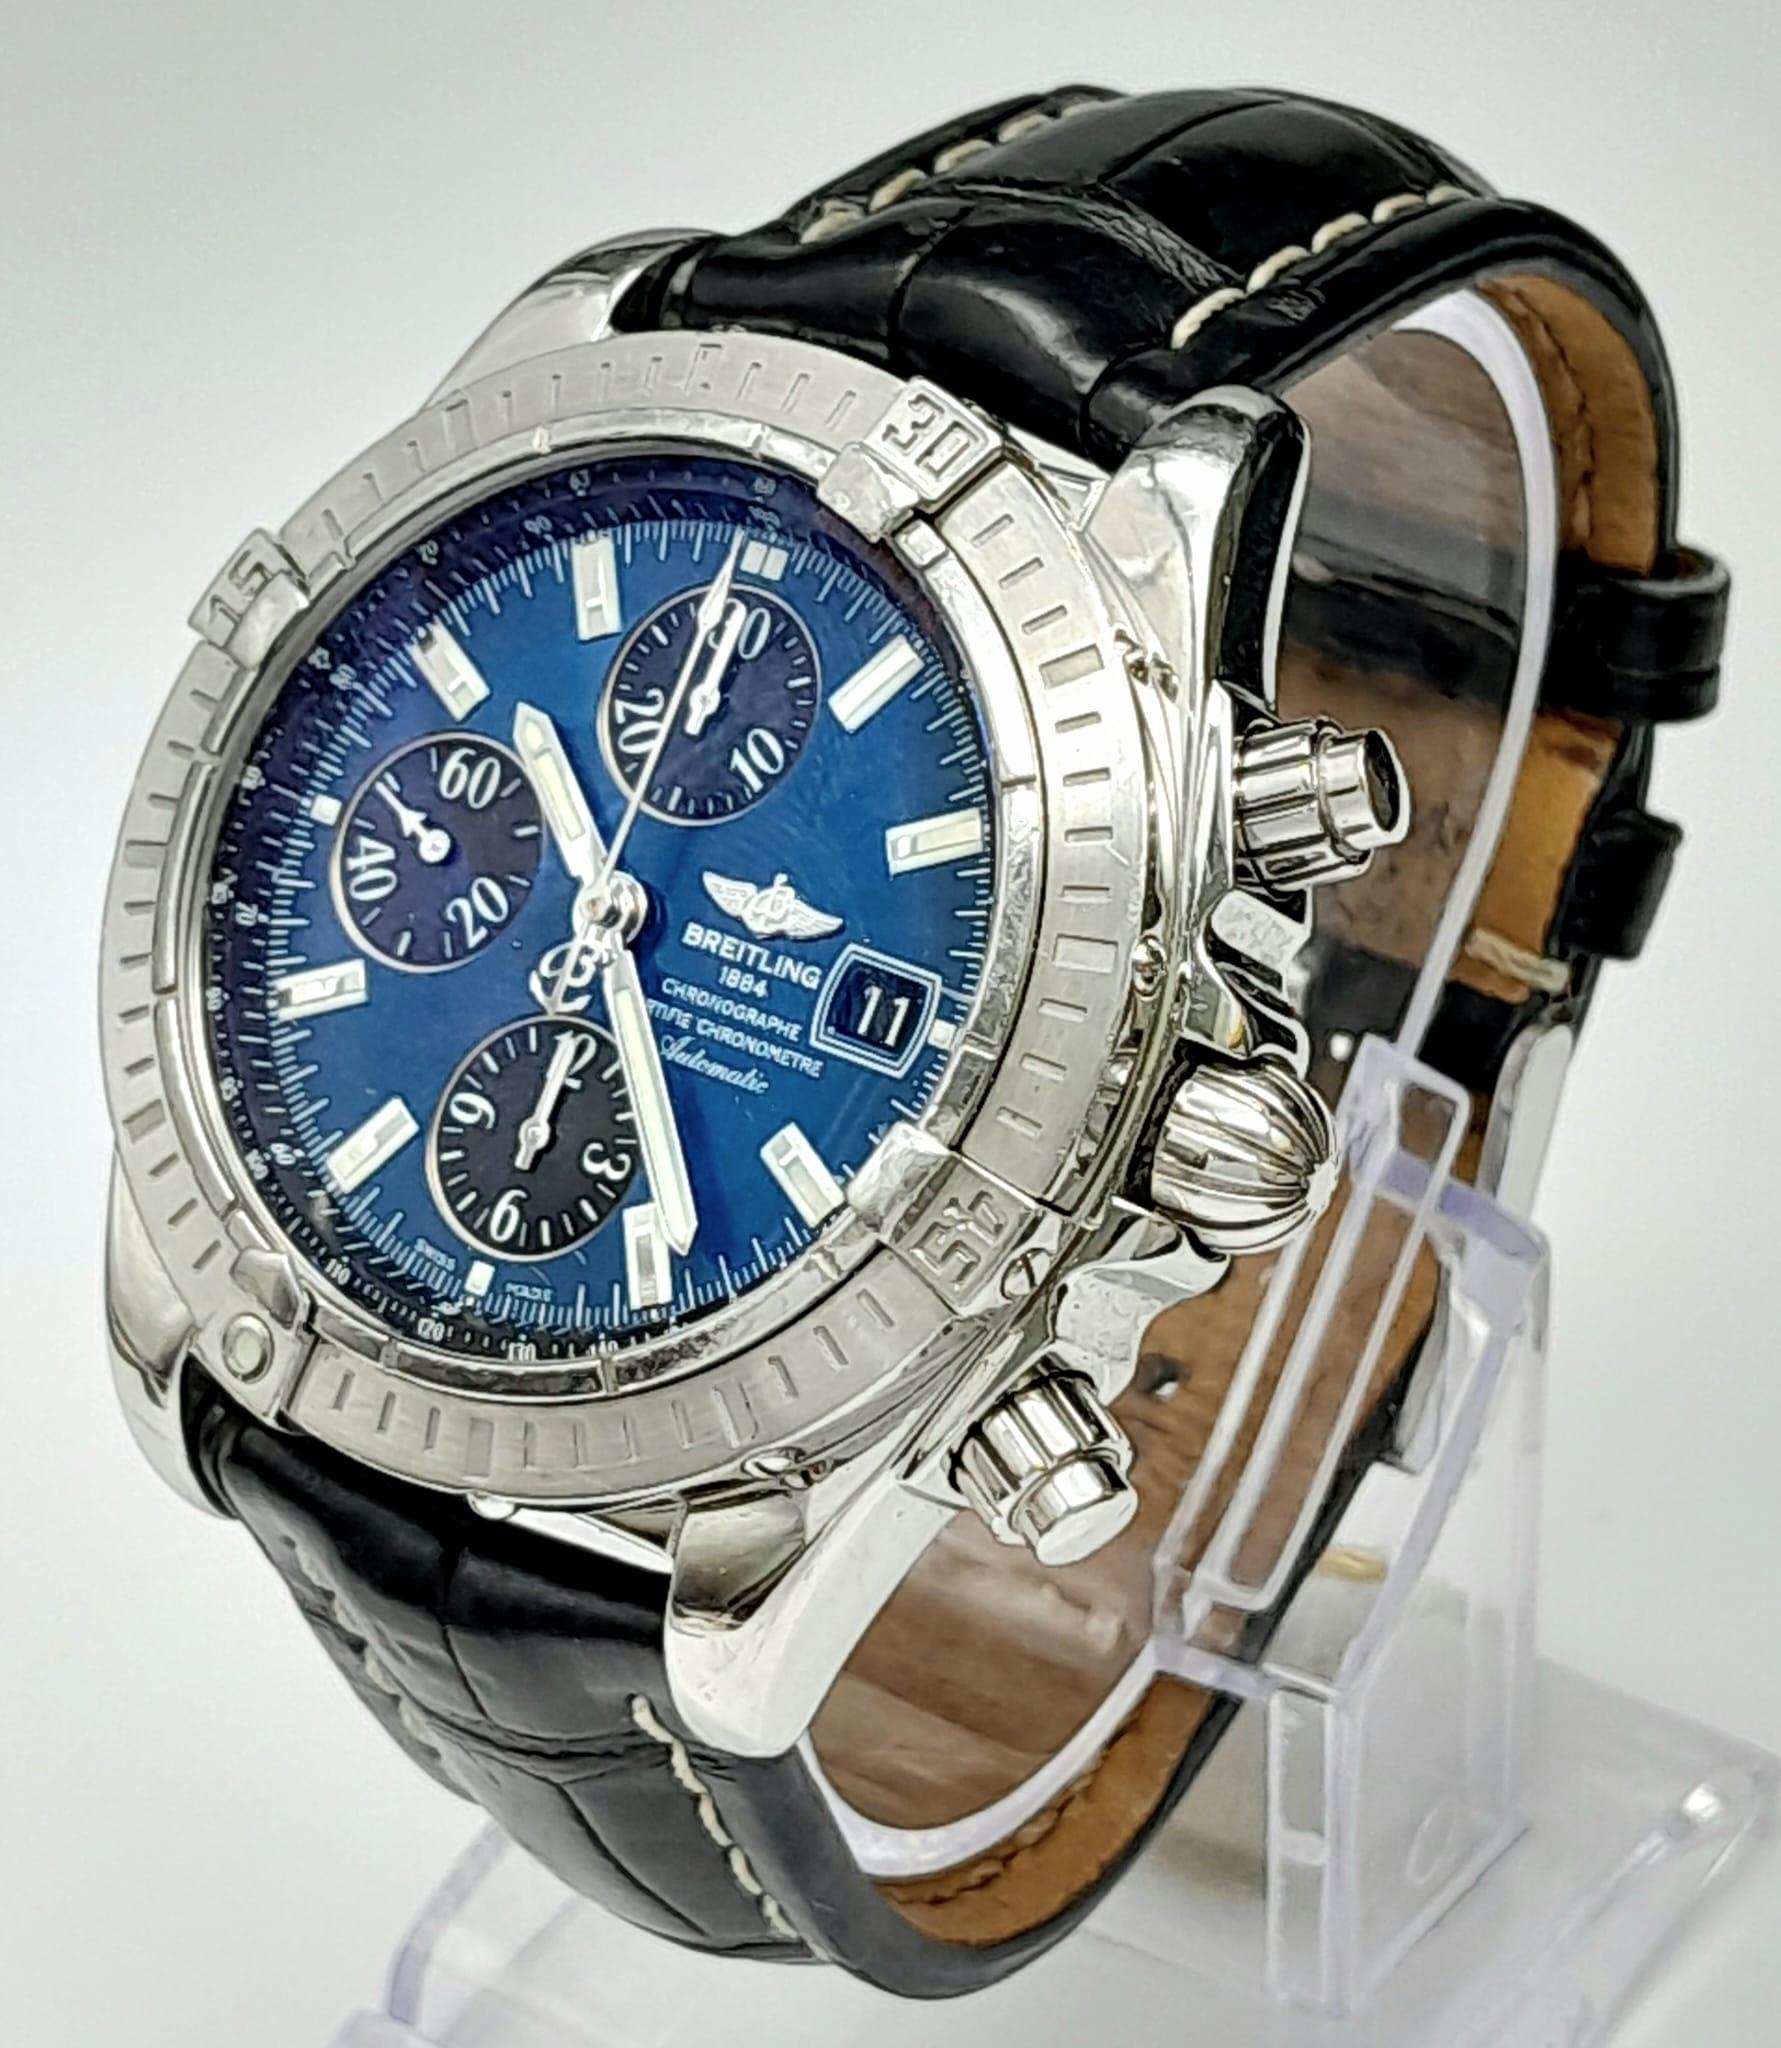 A Breitling Chronograph Automatic Gents Watch. Black leather strap. Stainless steel case - 44mm. - Image 2 of 24